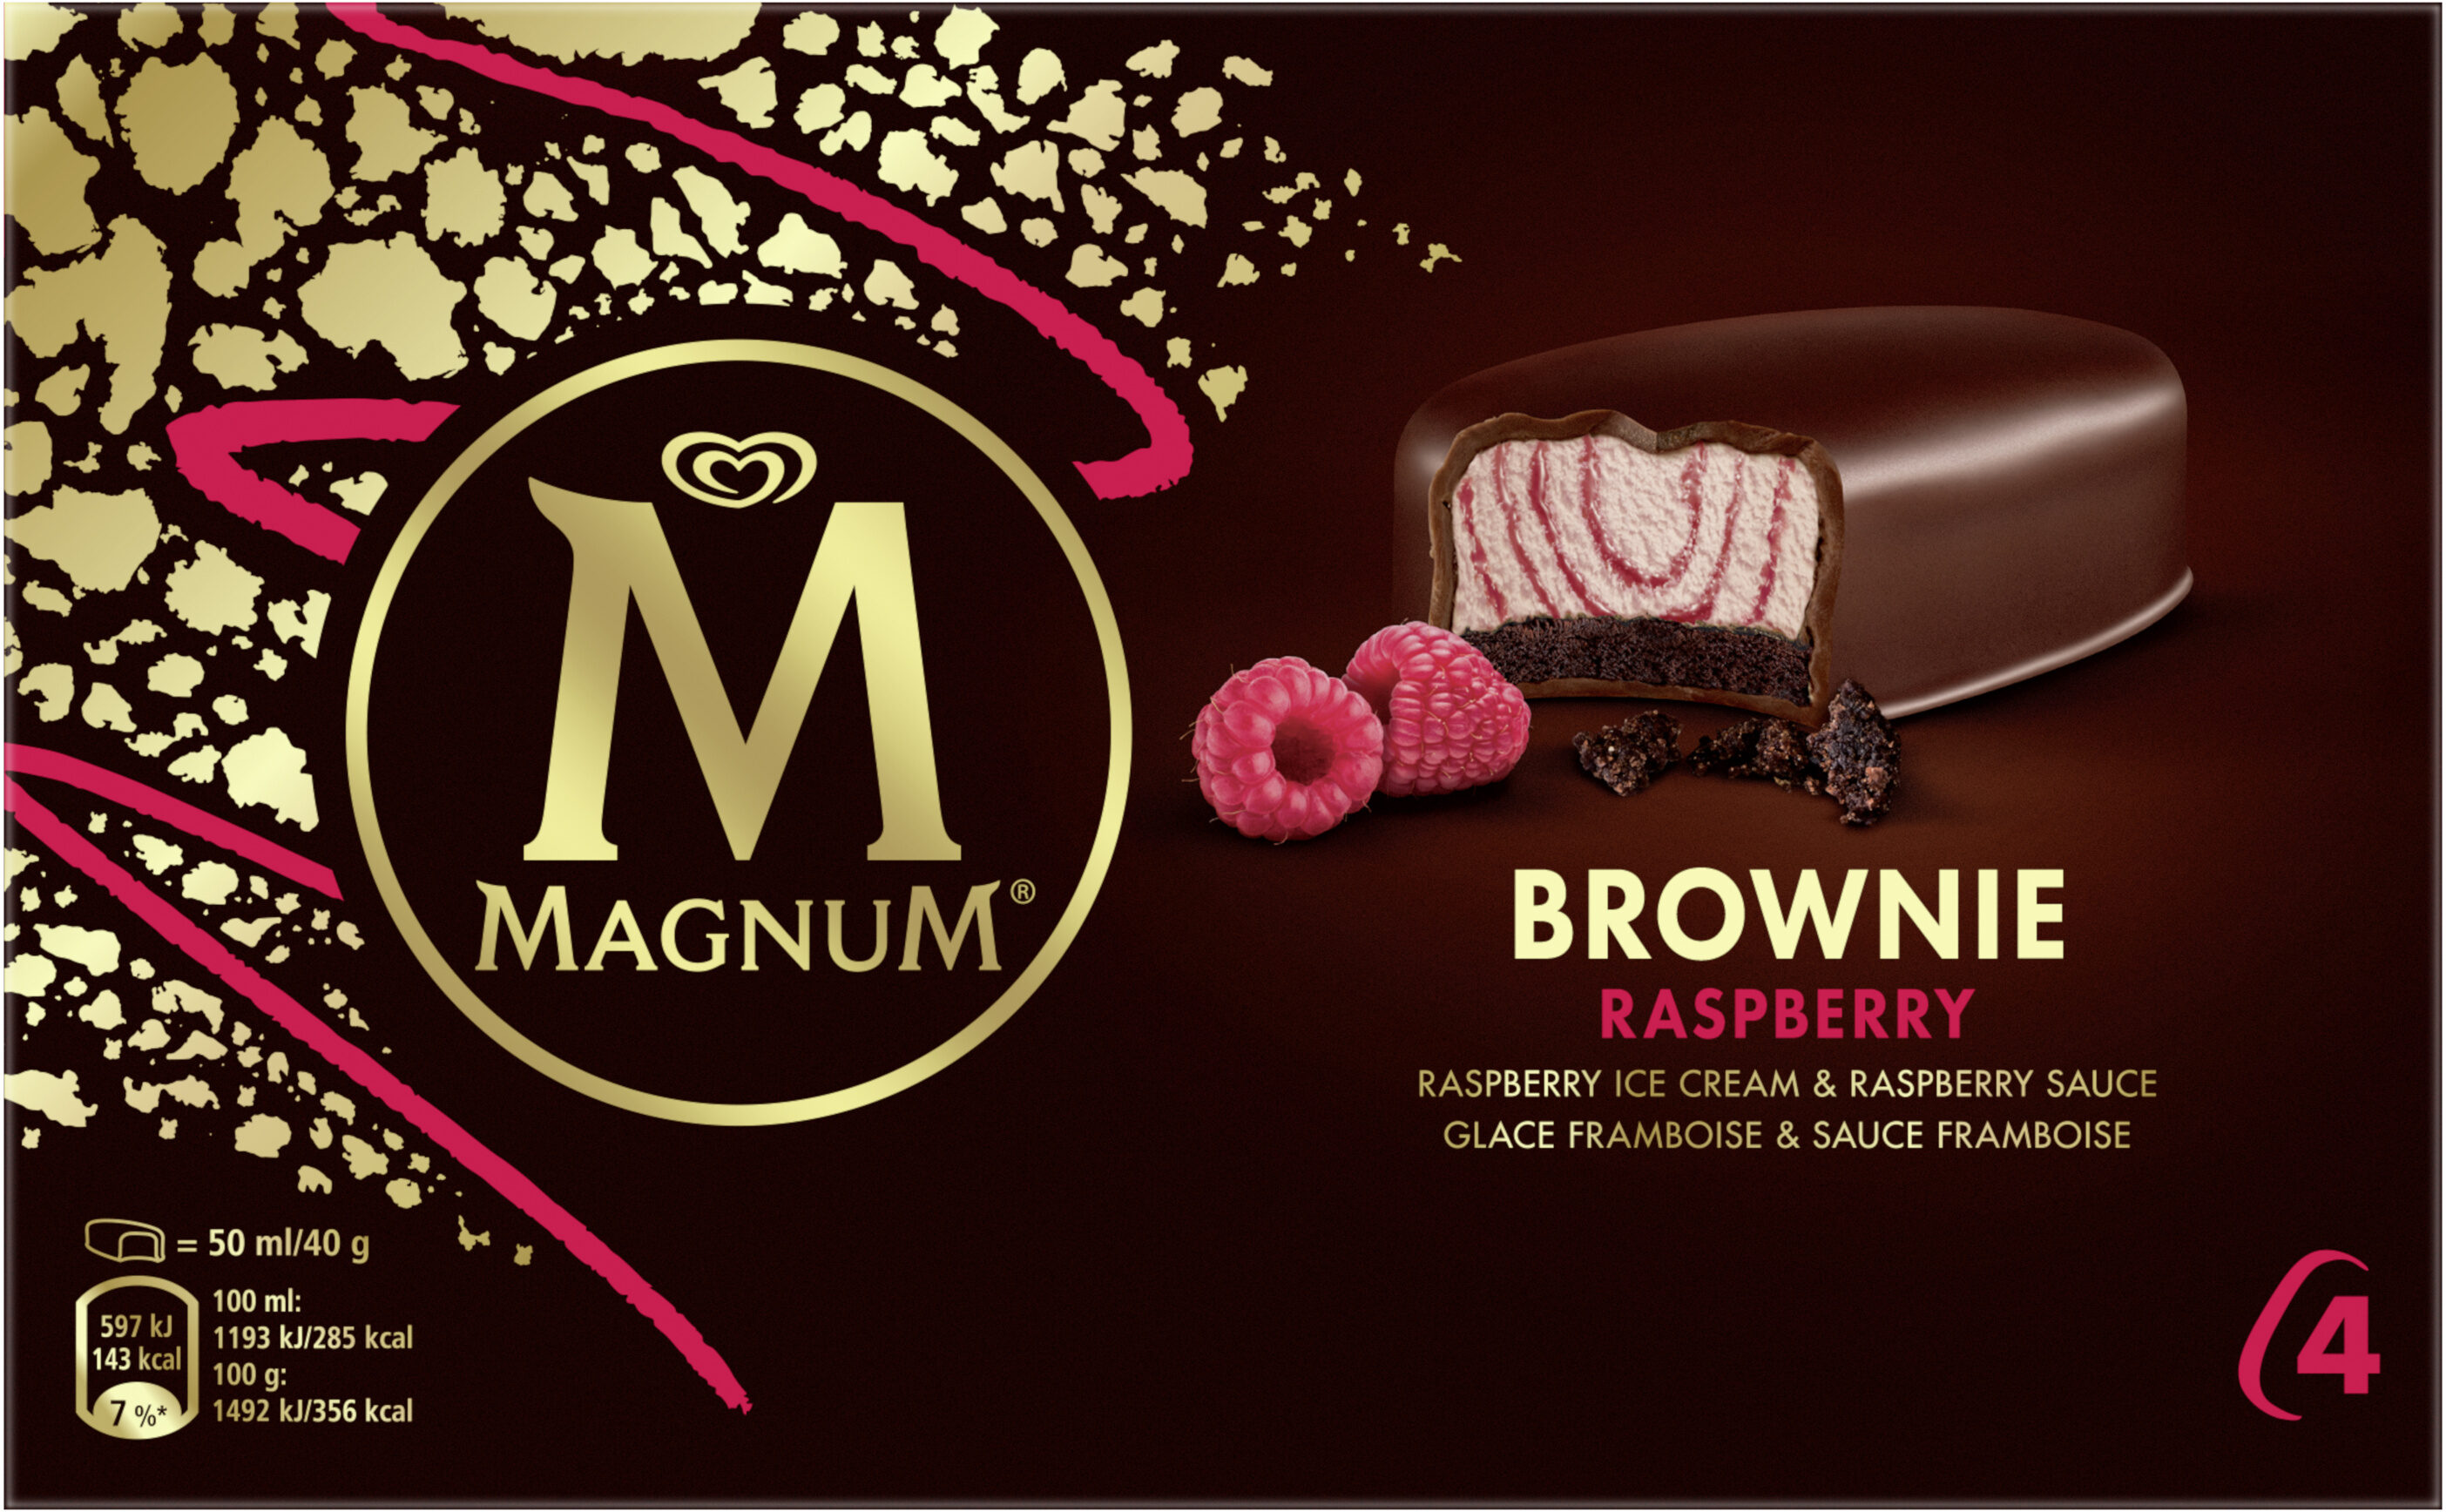 Magnum Barre Glacée Brownie Framboise x4 200ml - Product - fr